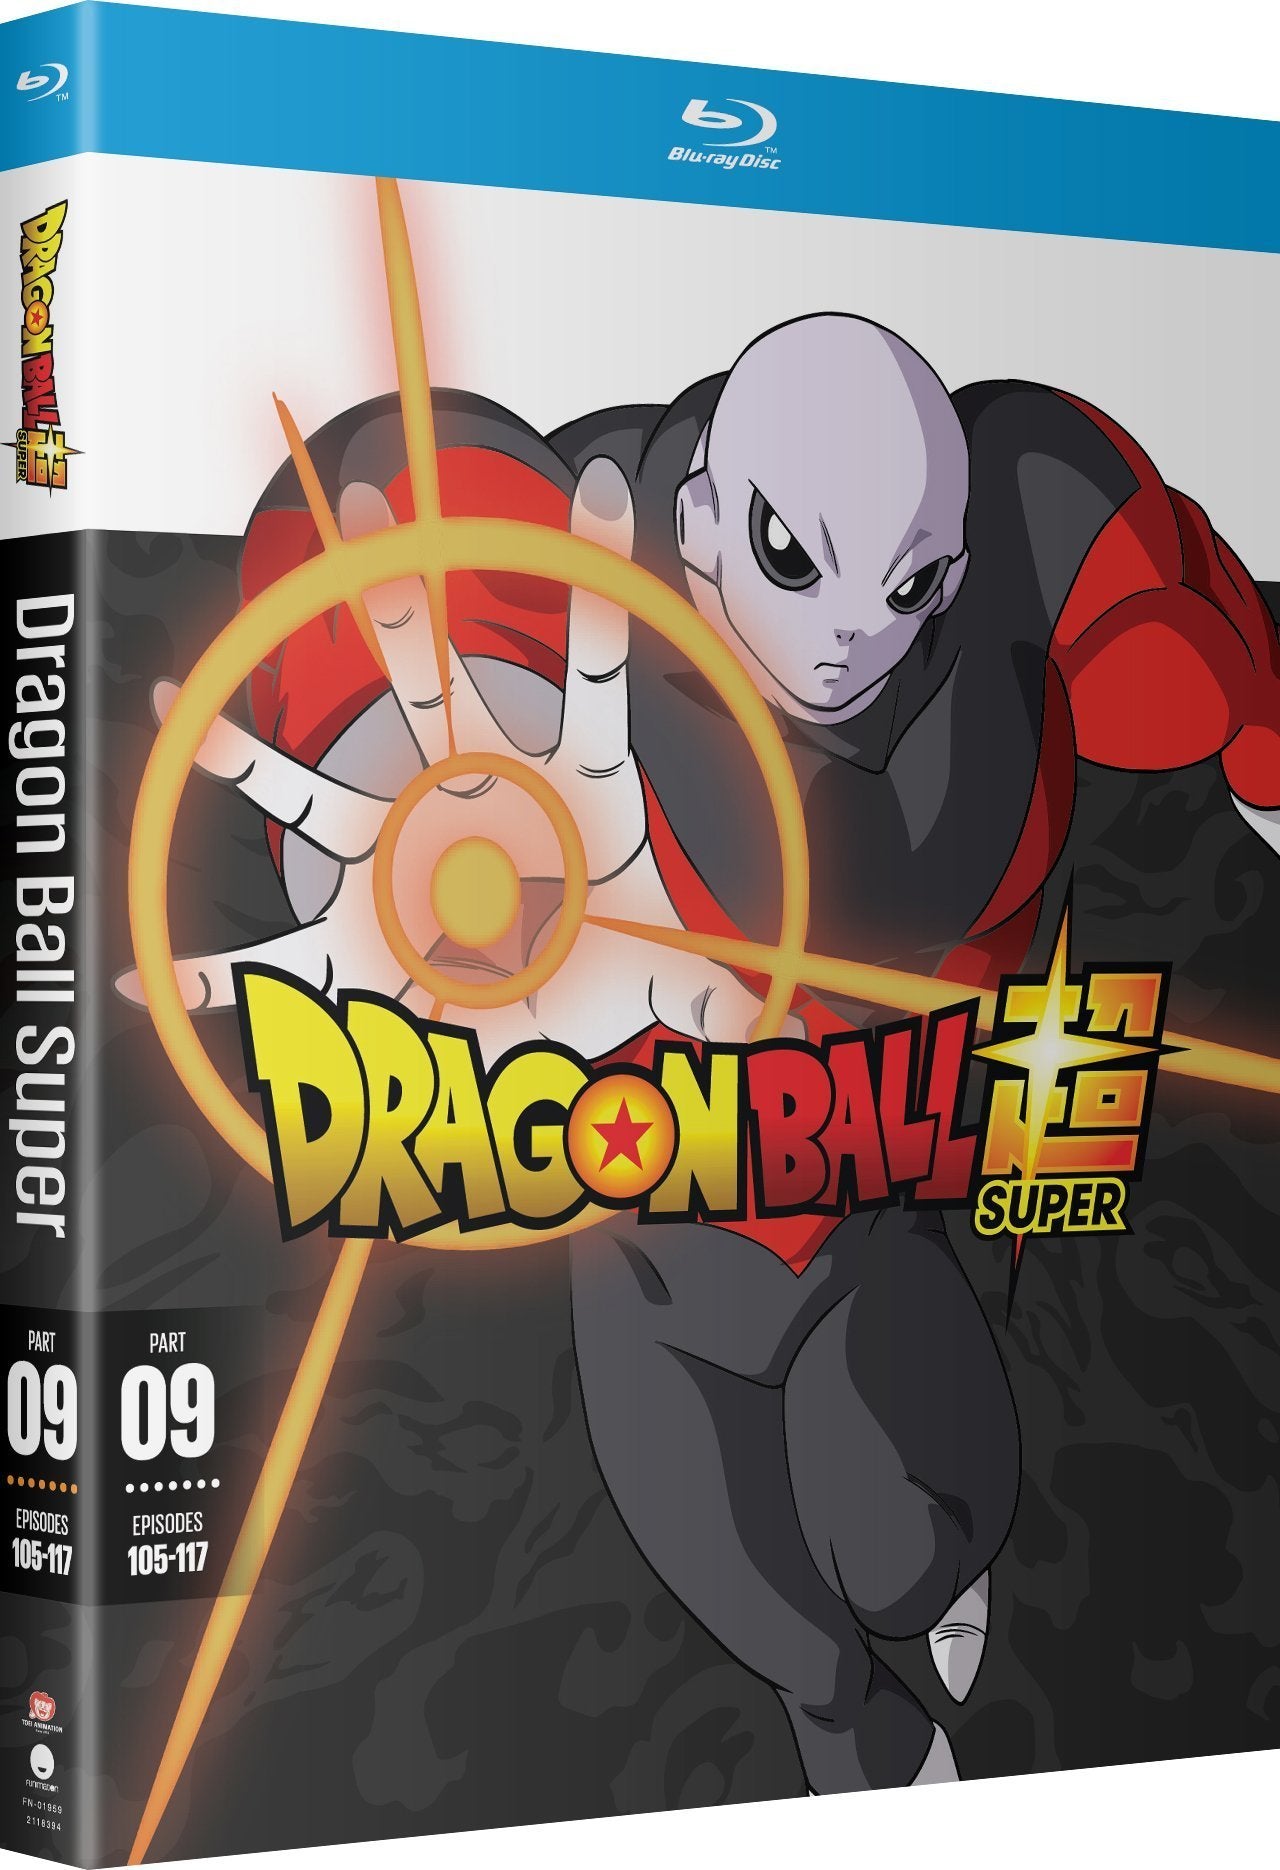 Dragon Ball Super - Part 9 - Blu-ray image count 1